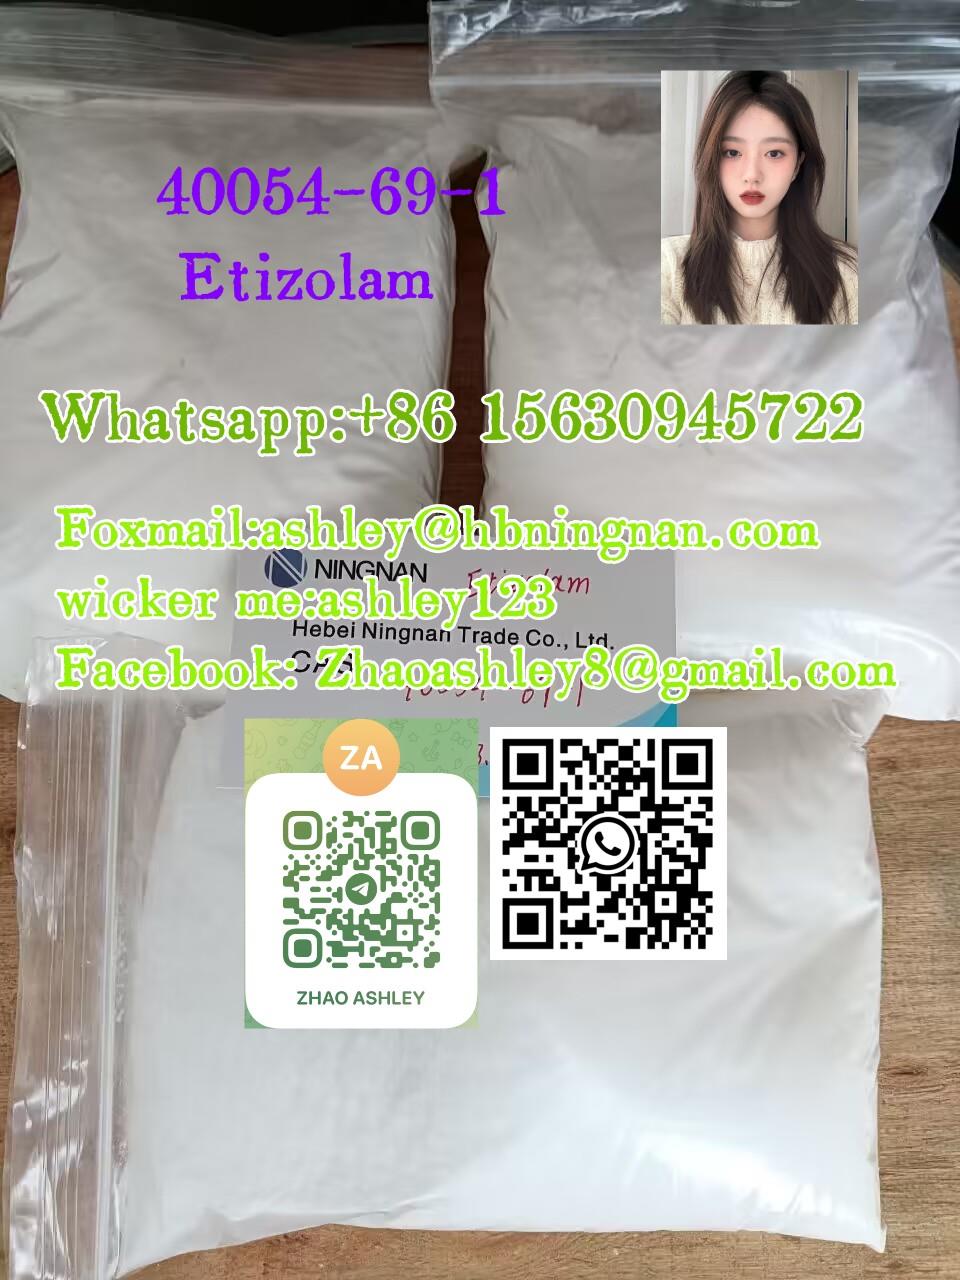 cas 40054-69-1 Etizolam Factory wholesale supply, competitive price!,Factory wholesale supply, competitive price!,ningnan ,Industrial Services/Architectural